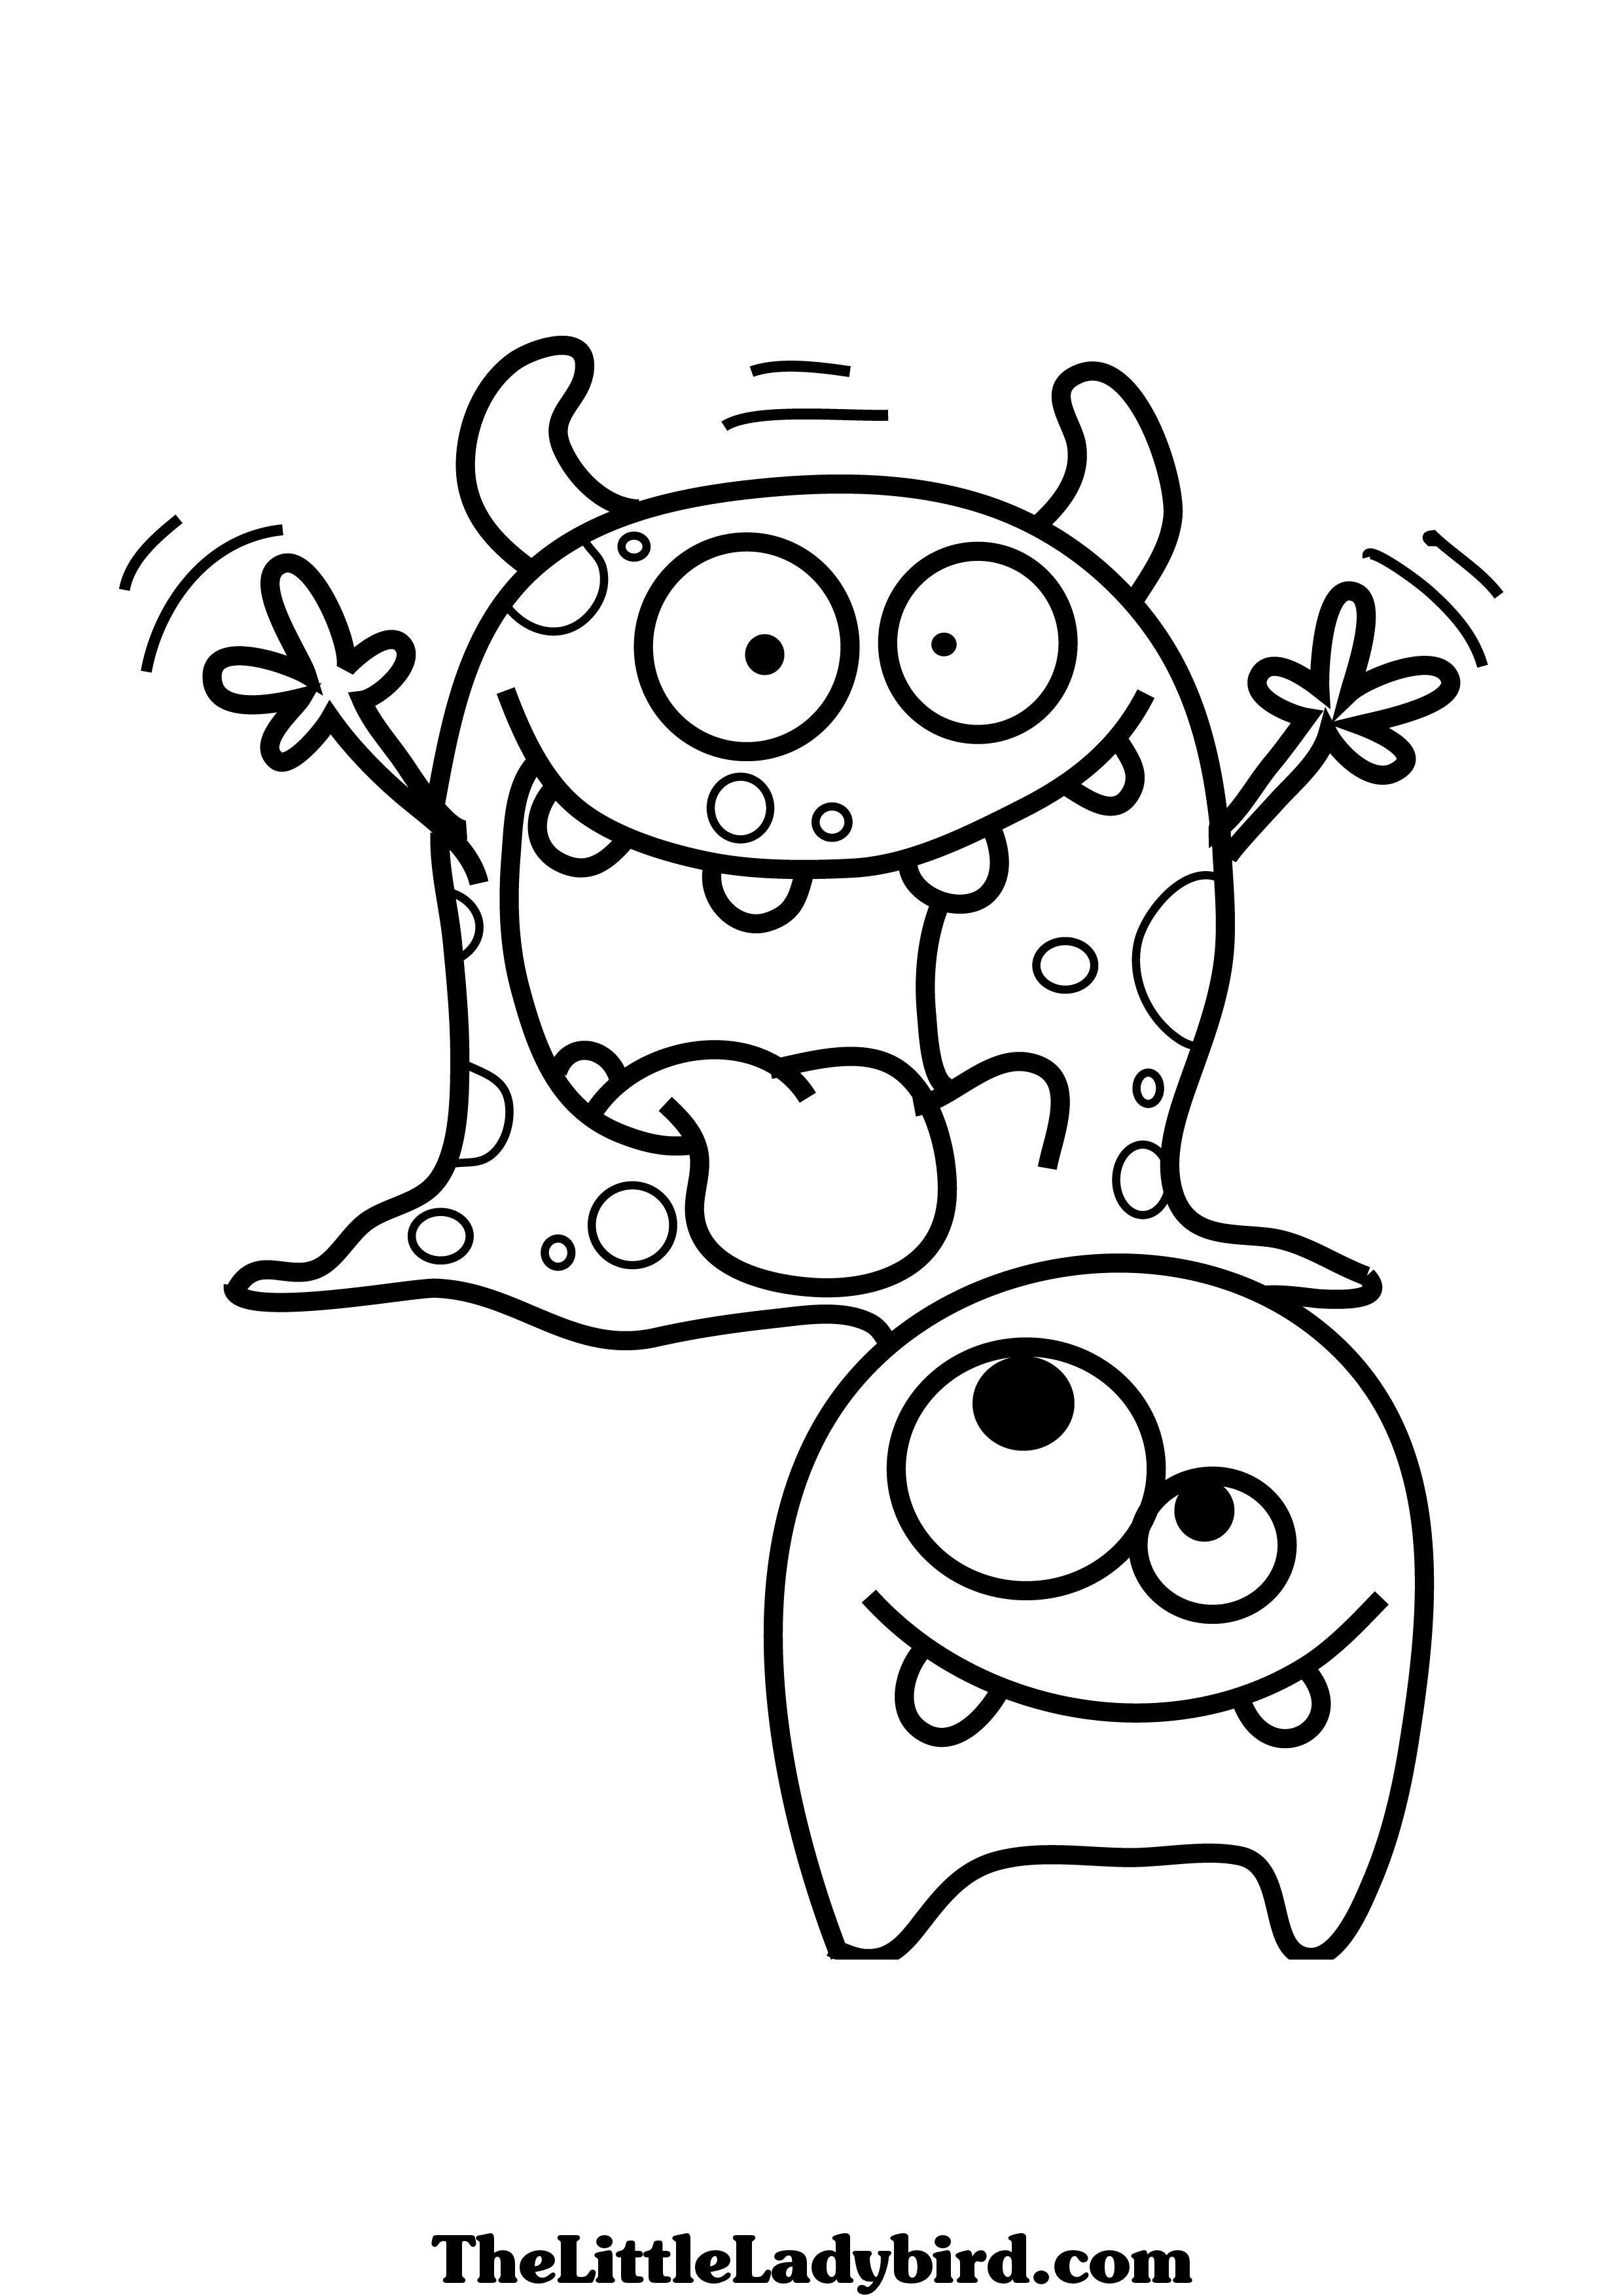 Monster Coloring Pages To Print Free Monster Coloring Page Thelittleladybird